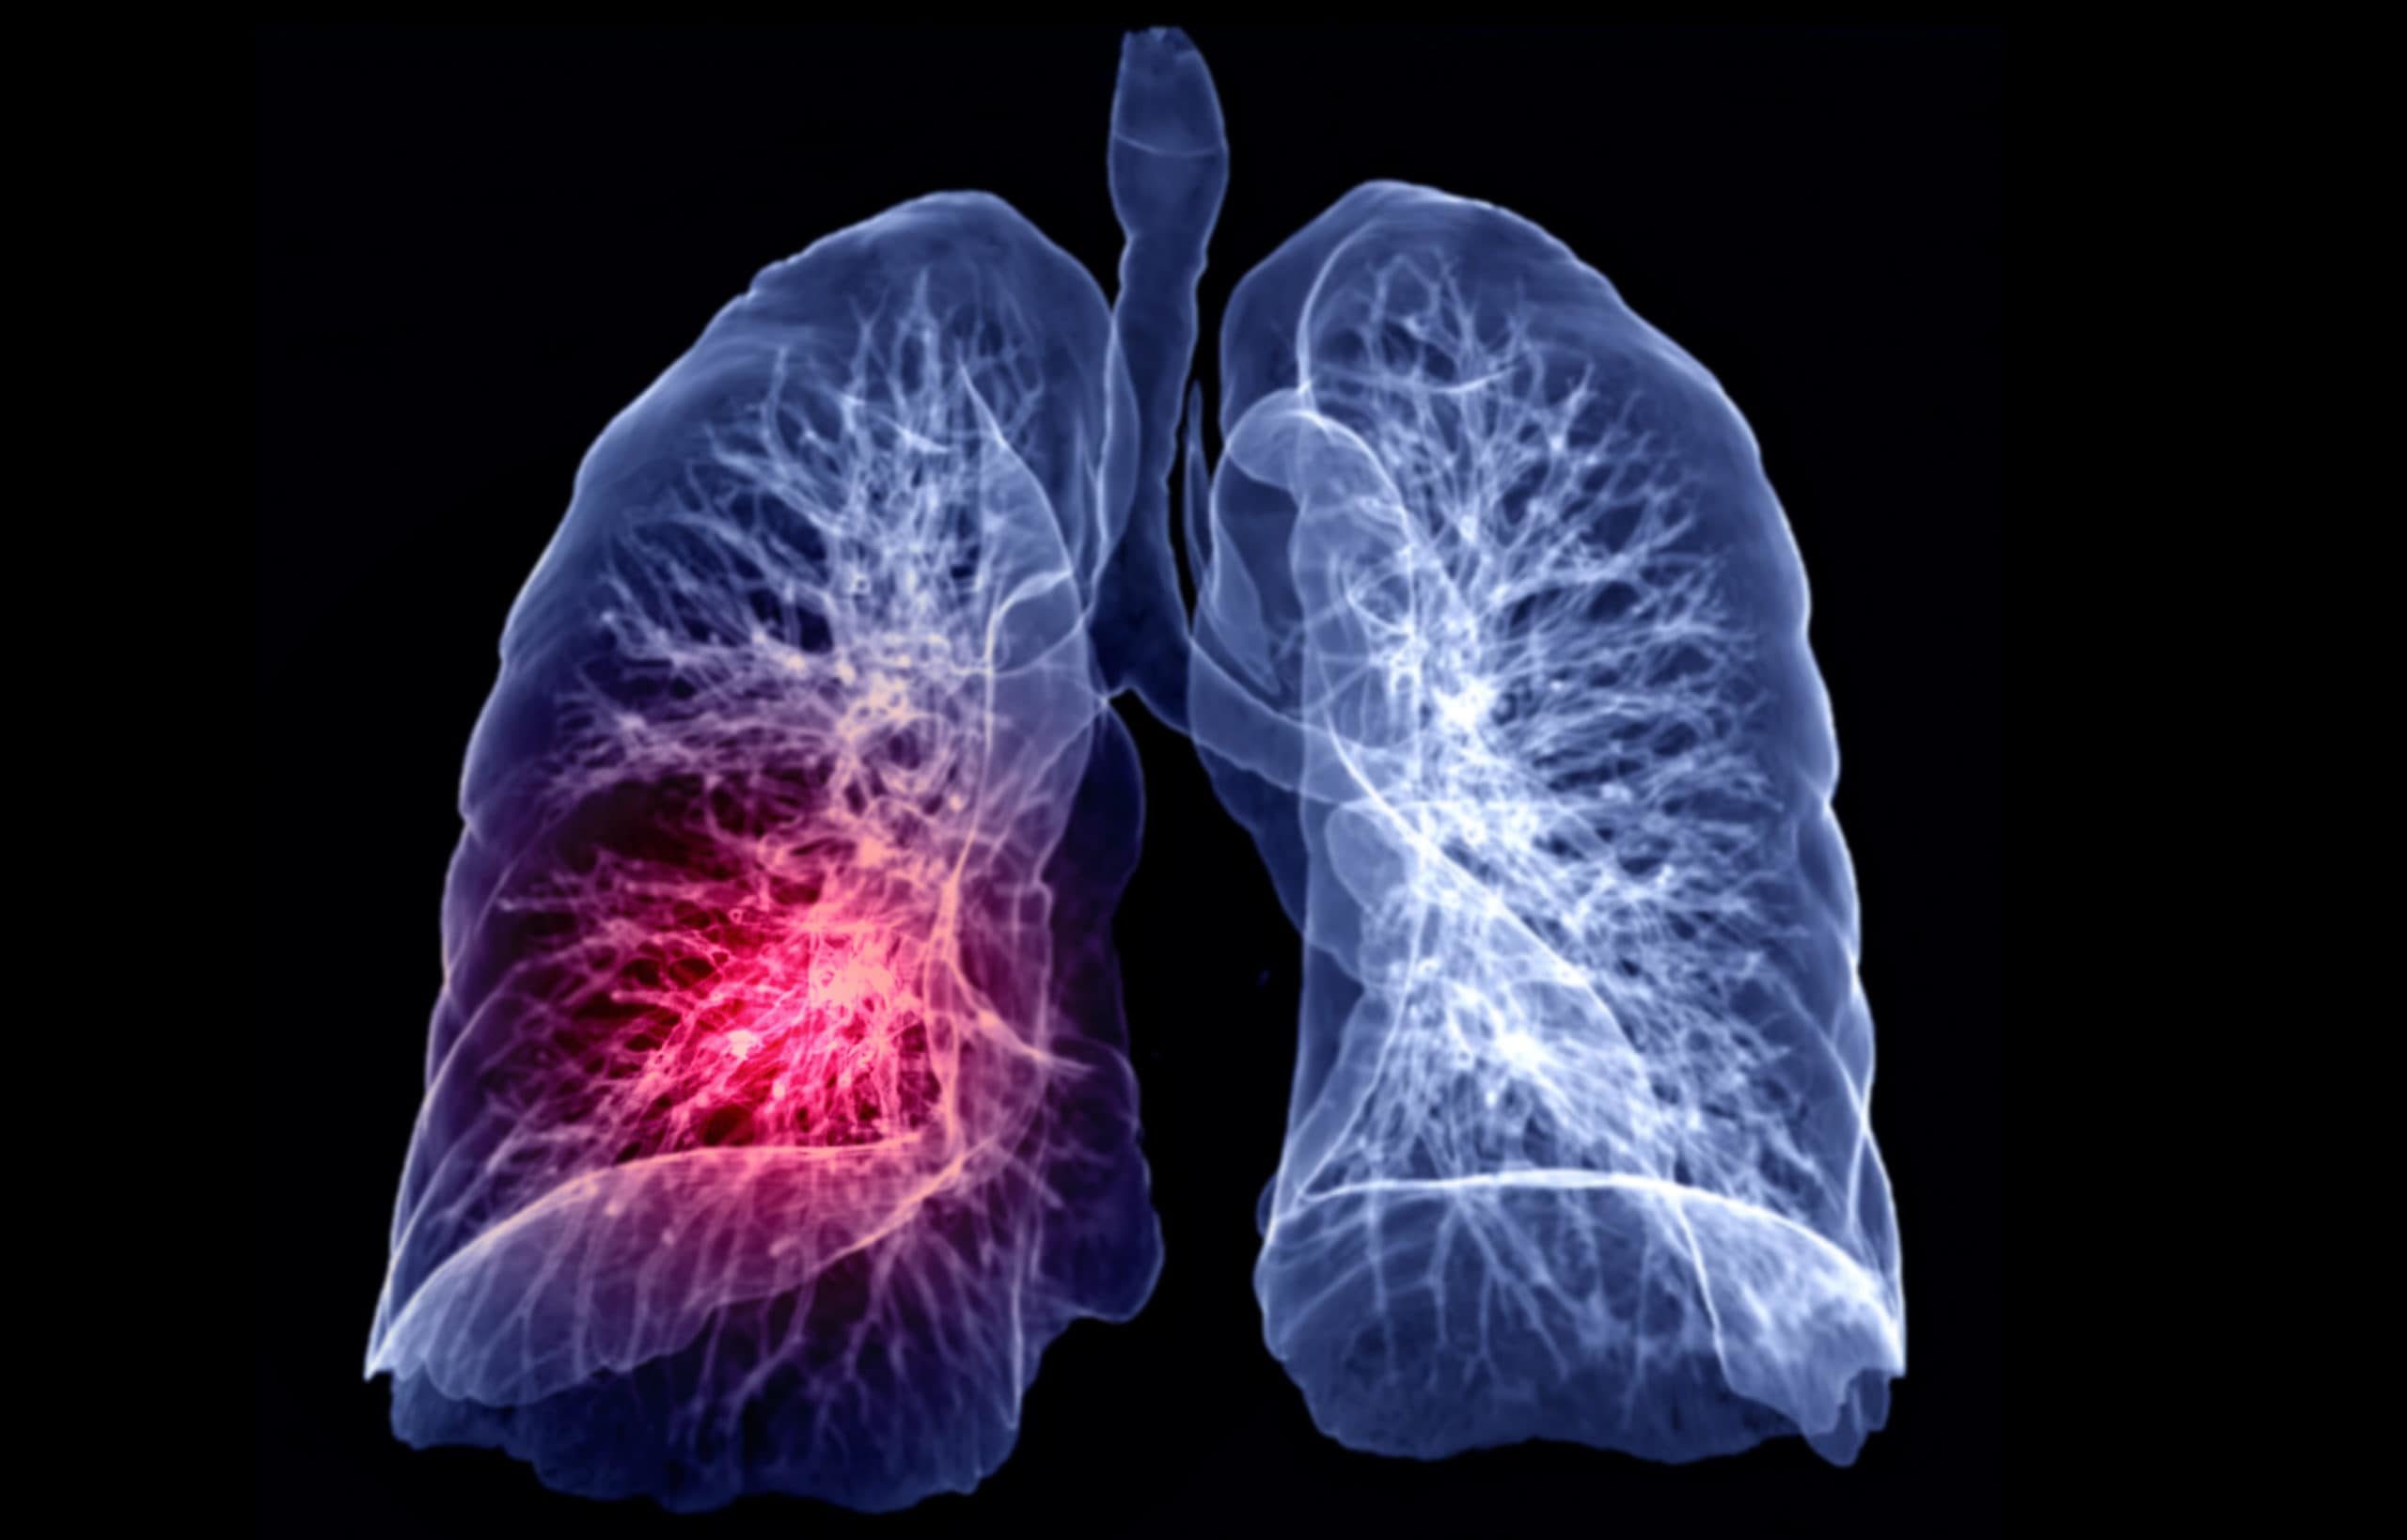 RadNet’s UK Lung Cancer Screening Acquisition